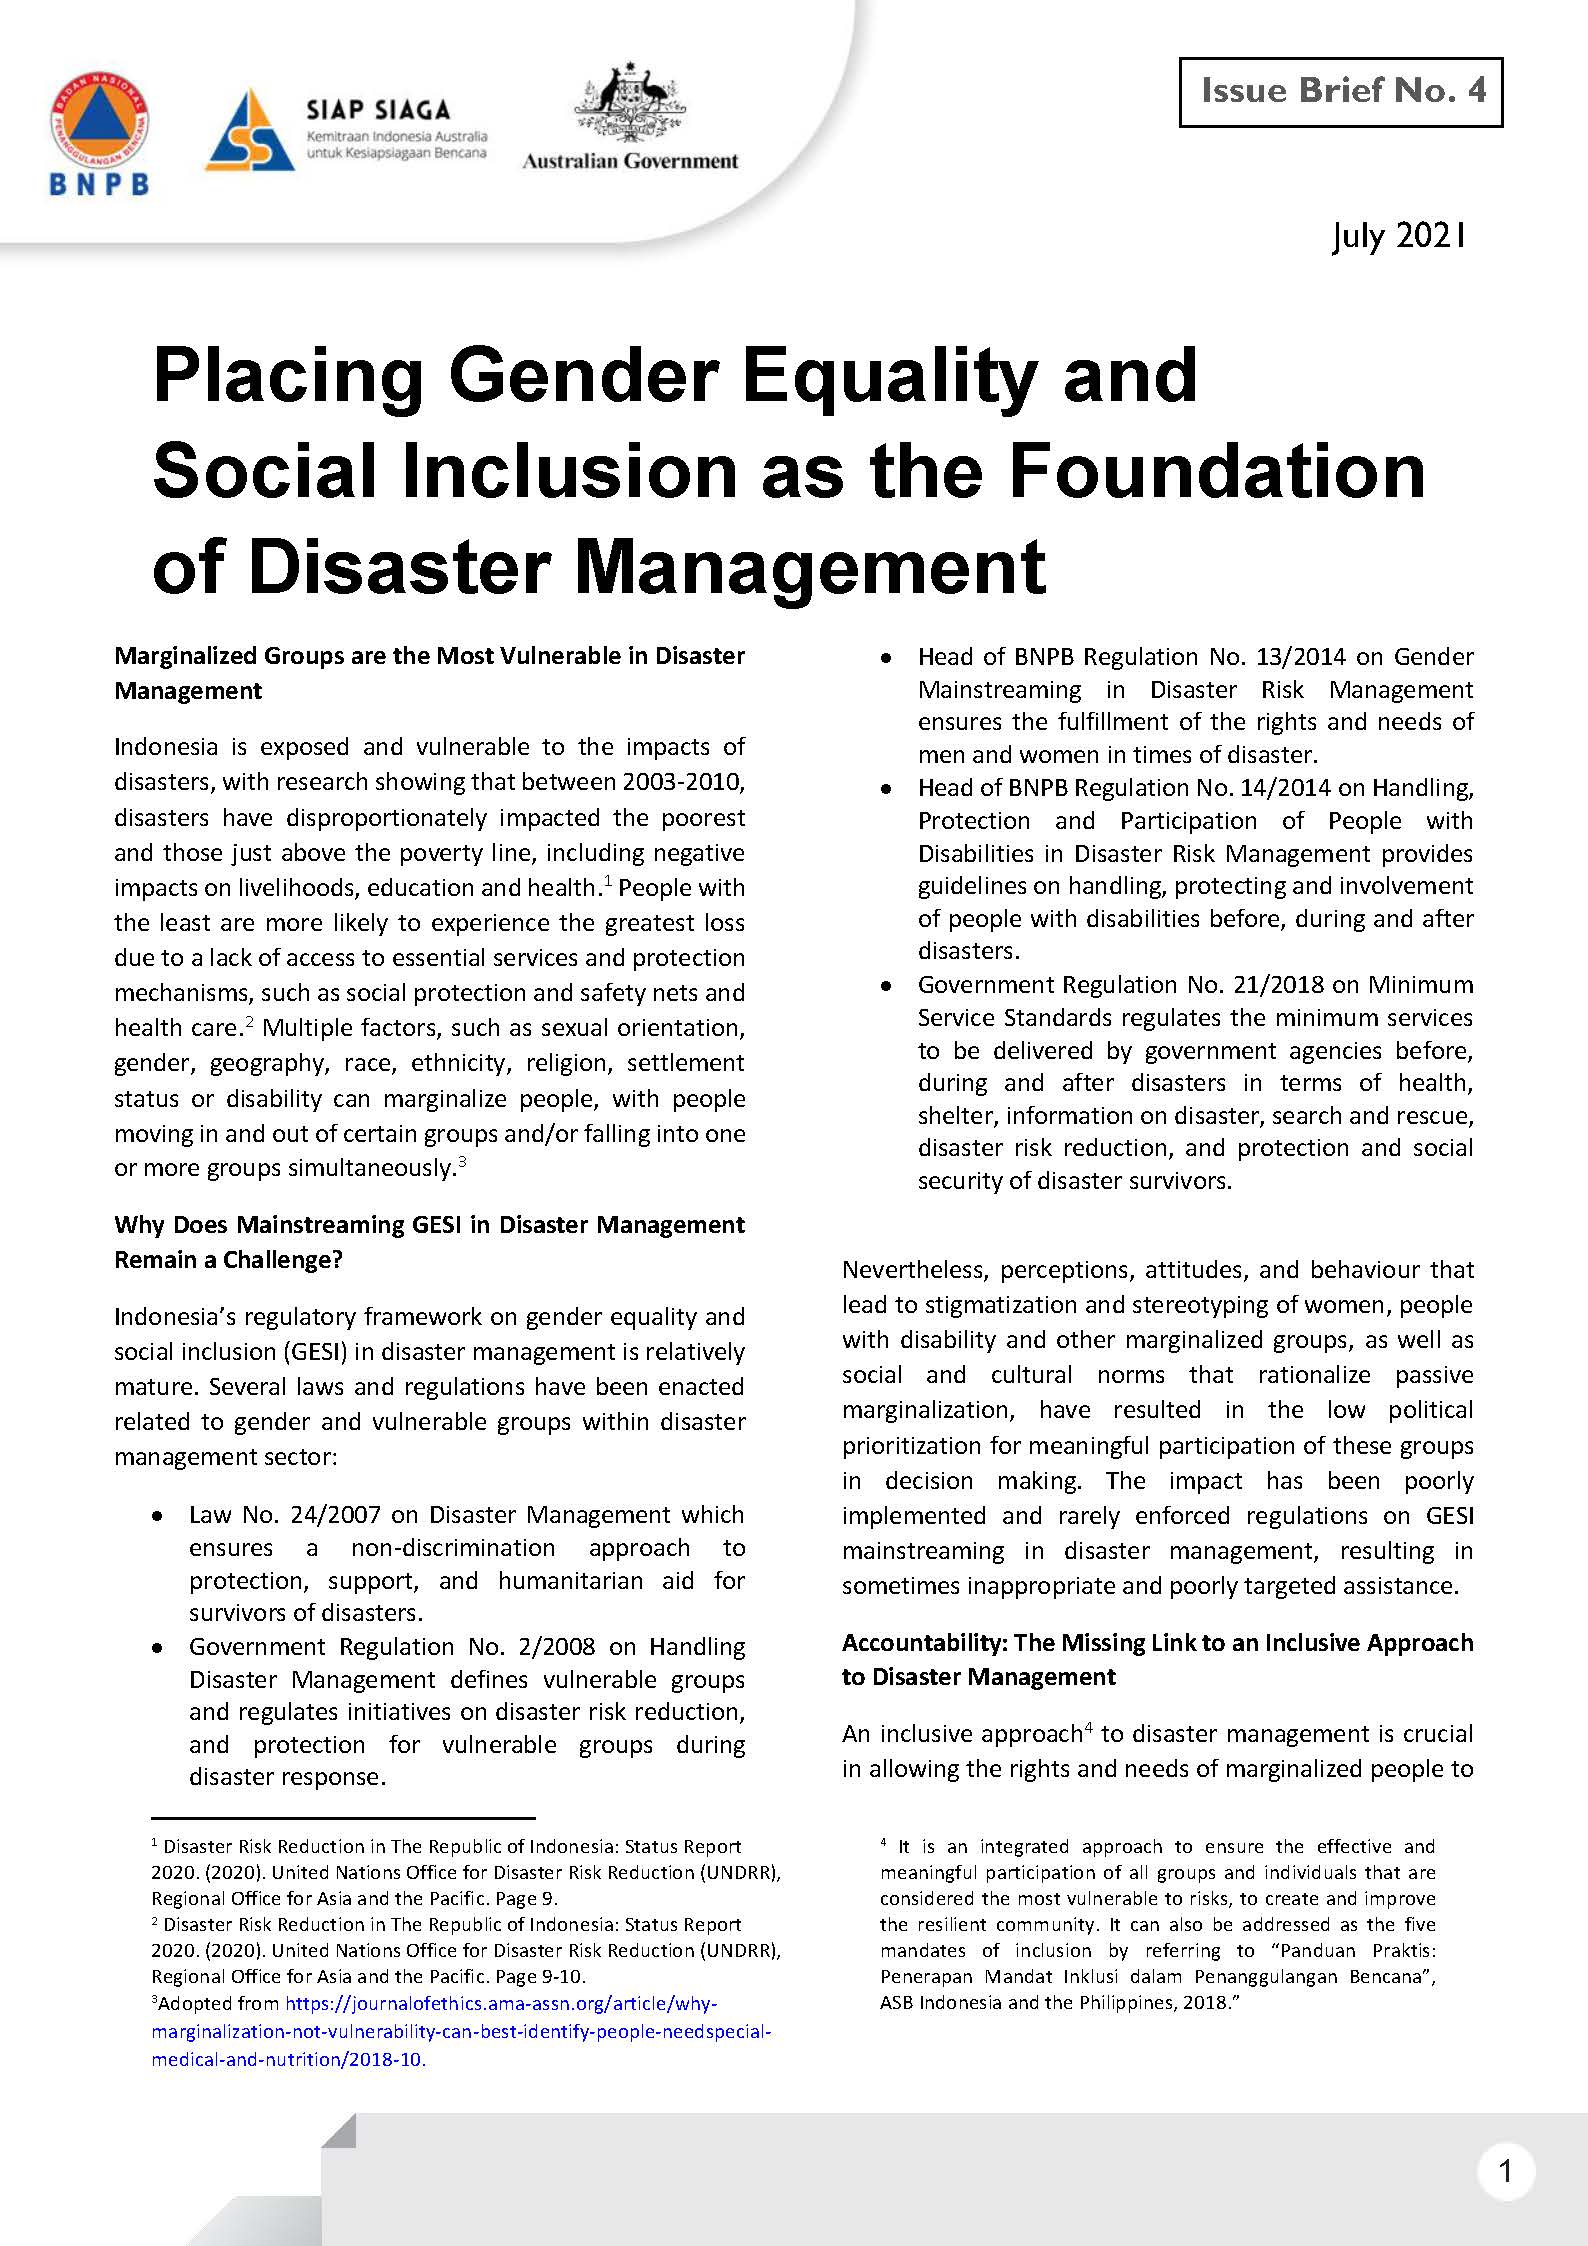 Issue Brief 4 – Placing Gender Equality and Social Inclusion as the Foundation of Disaster Management